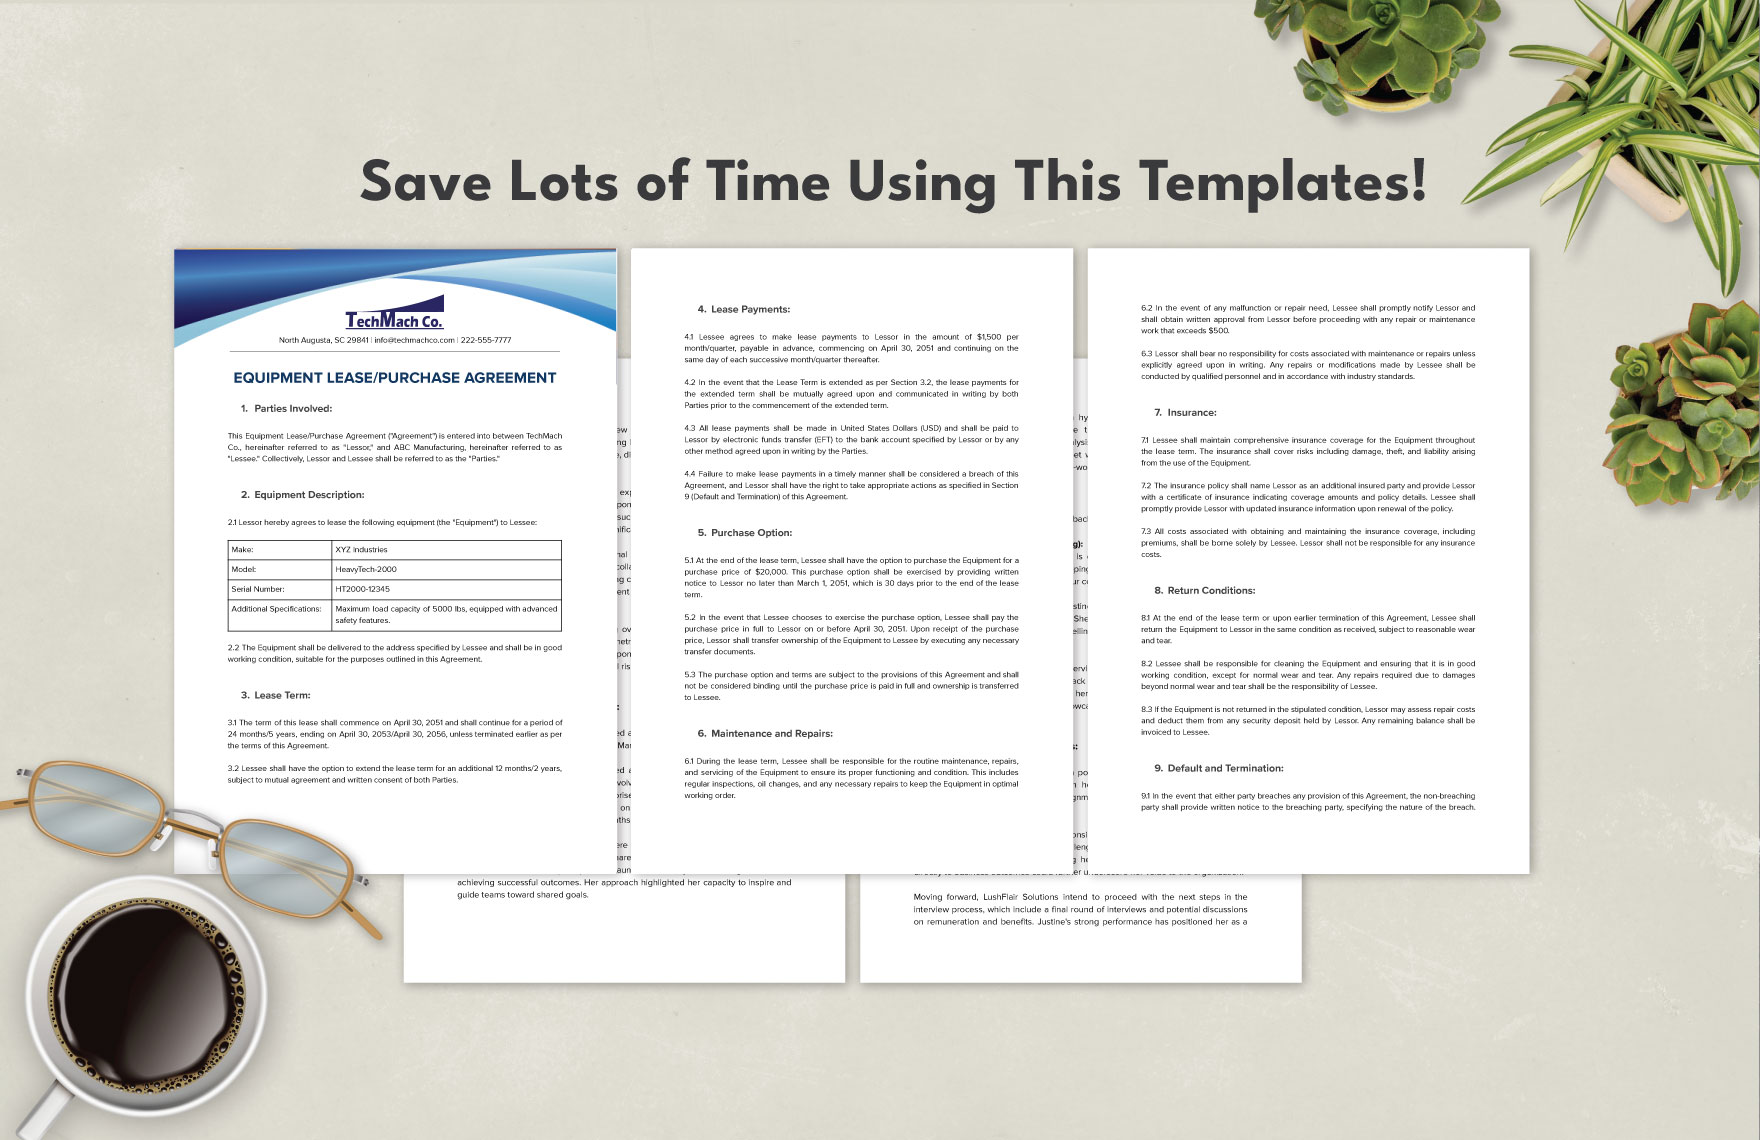 Equipment Lease/Purchase Agreement Template